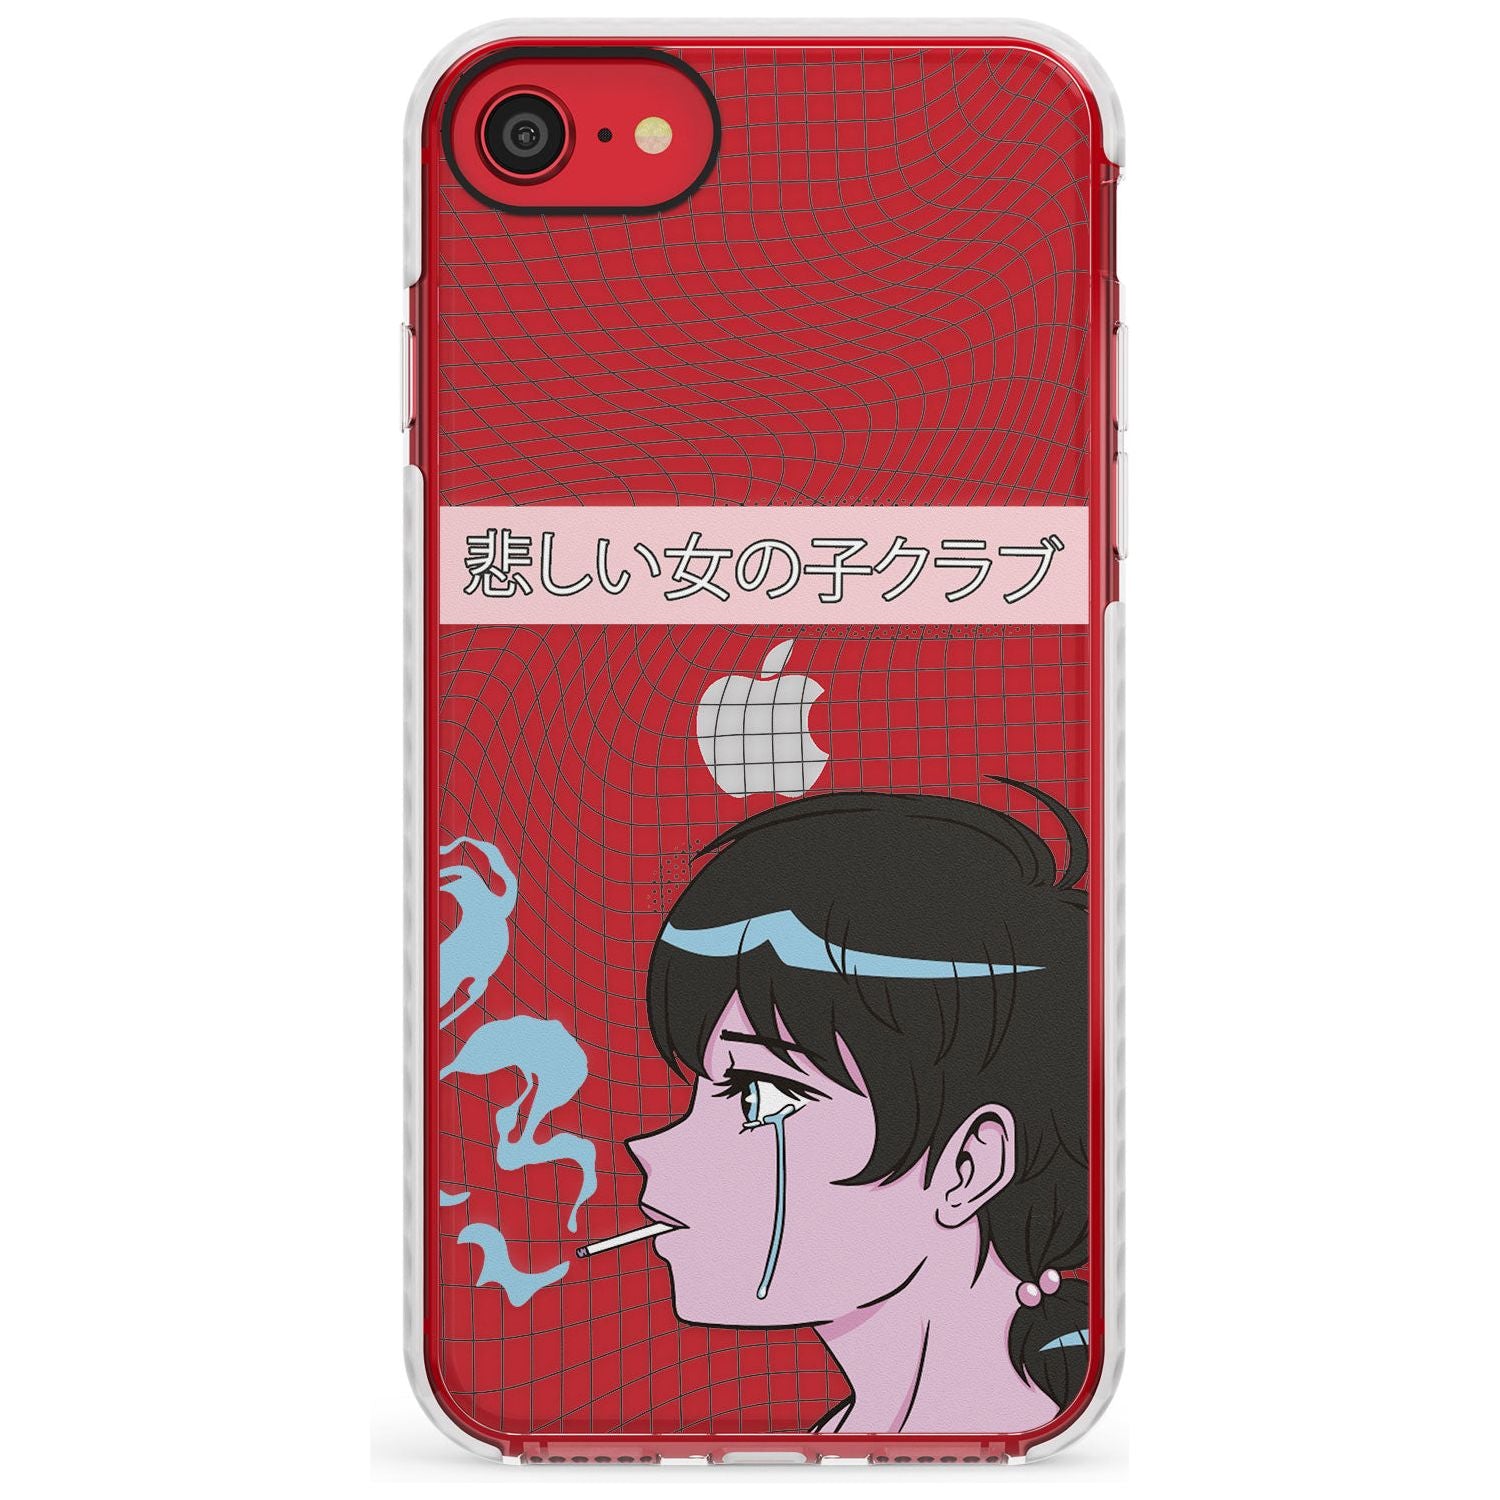 Lost Love Impact Phone Case for iPhone SE 8 7 Plus